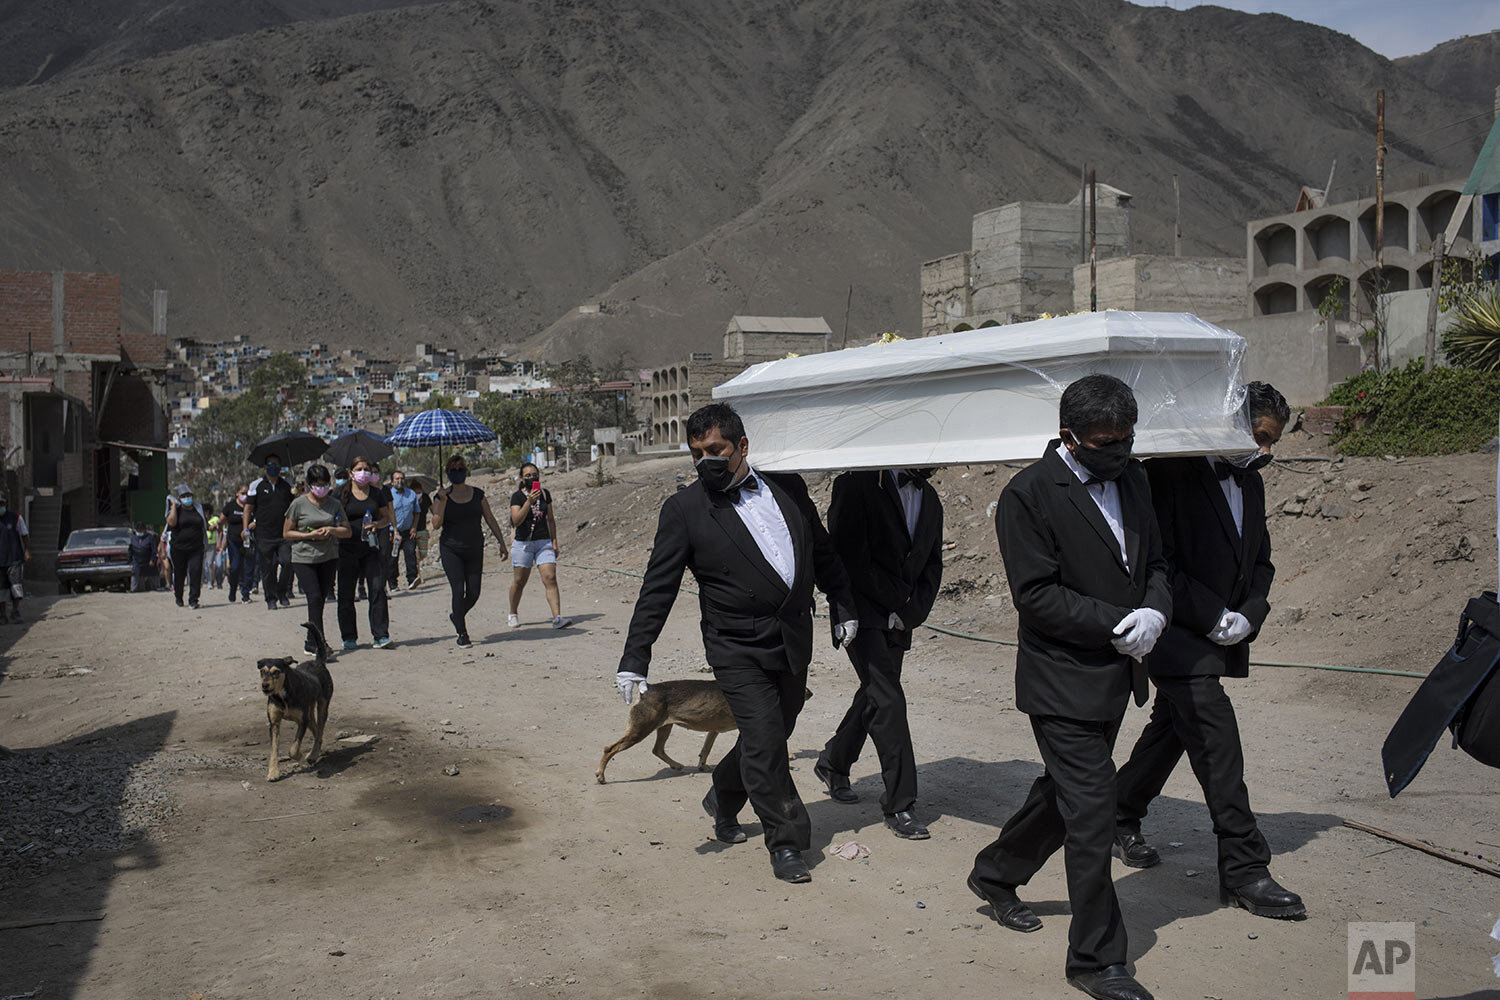  Funeral workers carry the coffin 80-year-old COVID-19 victim Pedro Miguel Infante Vilchez to the "Martires 19 de Julio" cemetery in Comas on the outskirts of Lima, Peru, Jan. 21, 2021. (AP Photo/Rodrigo Abd) 